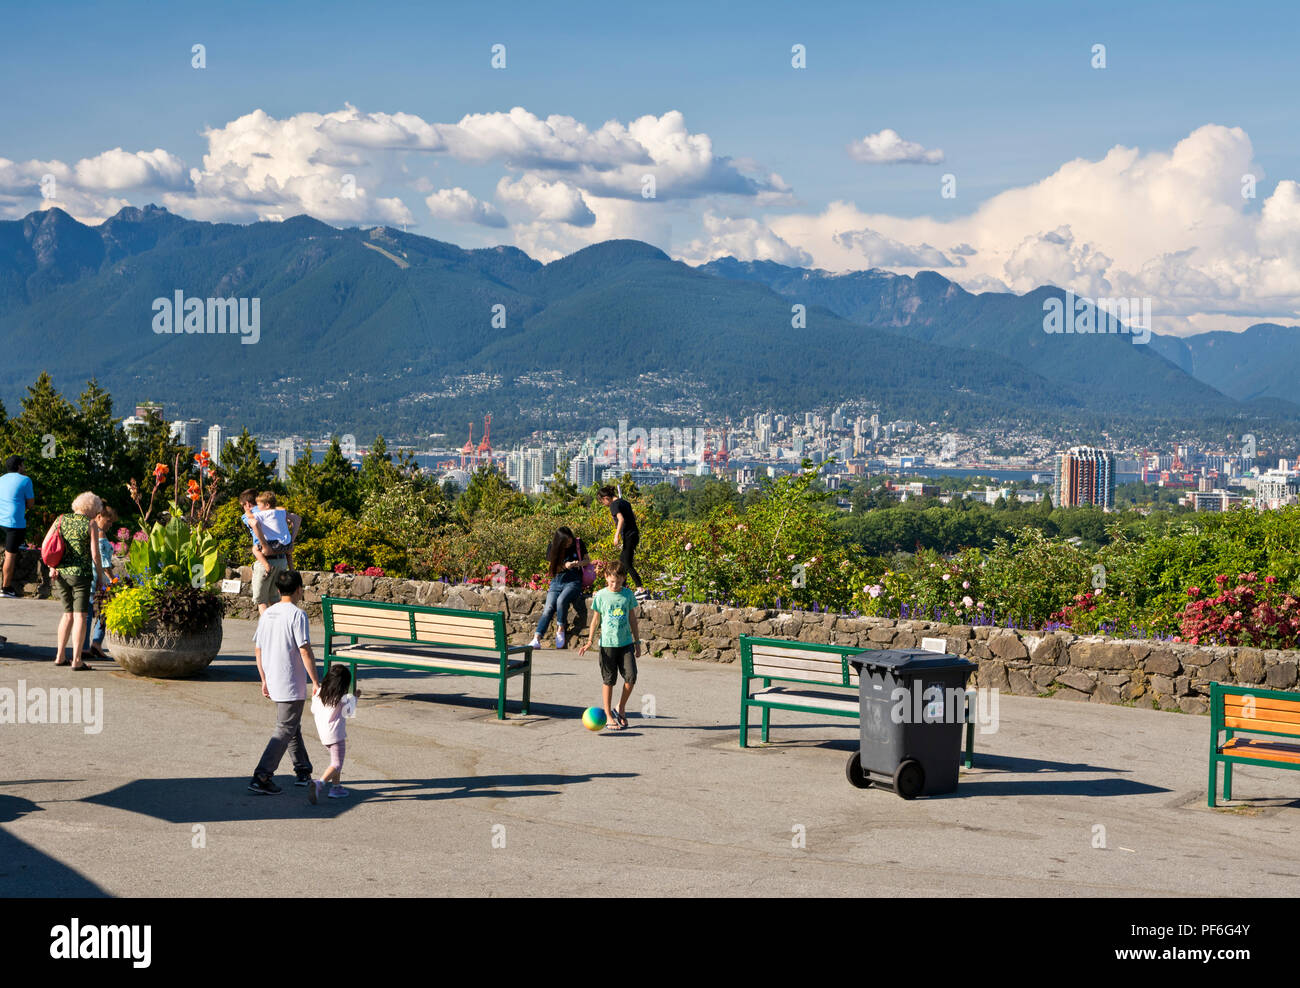 Queen Elizabeth Park in Vancouver, BC Canada.  People observing the scenic view of the city and mountains. Stock Photo